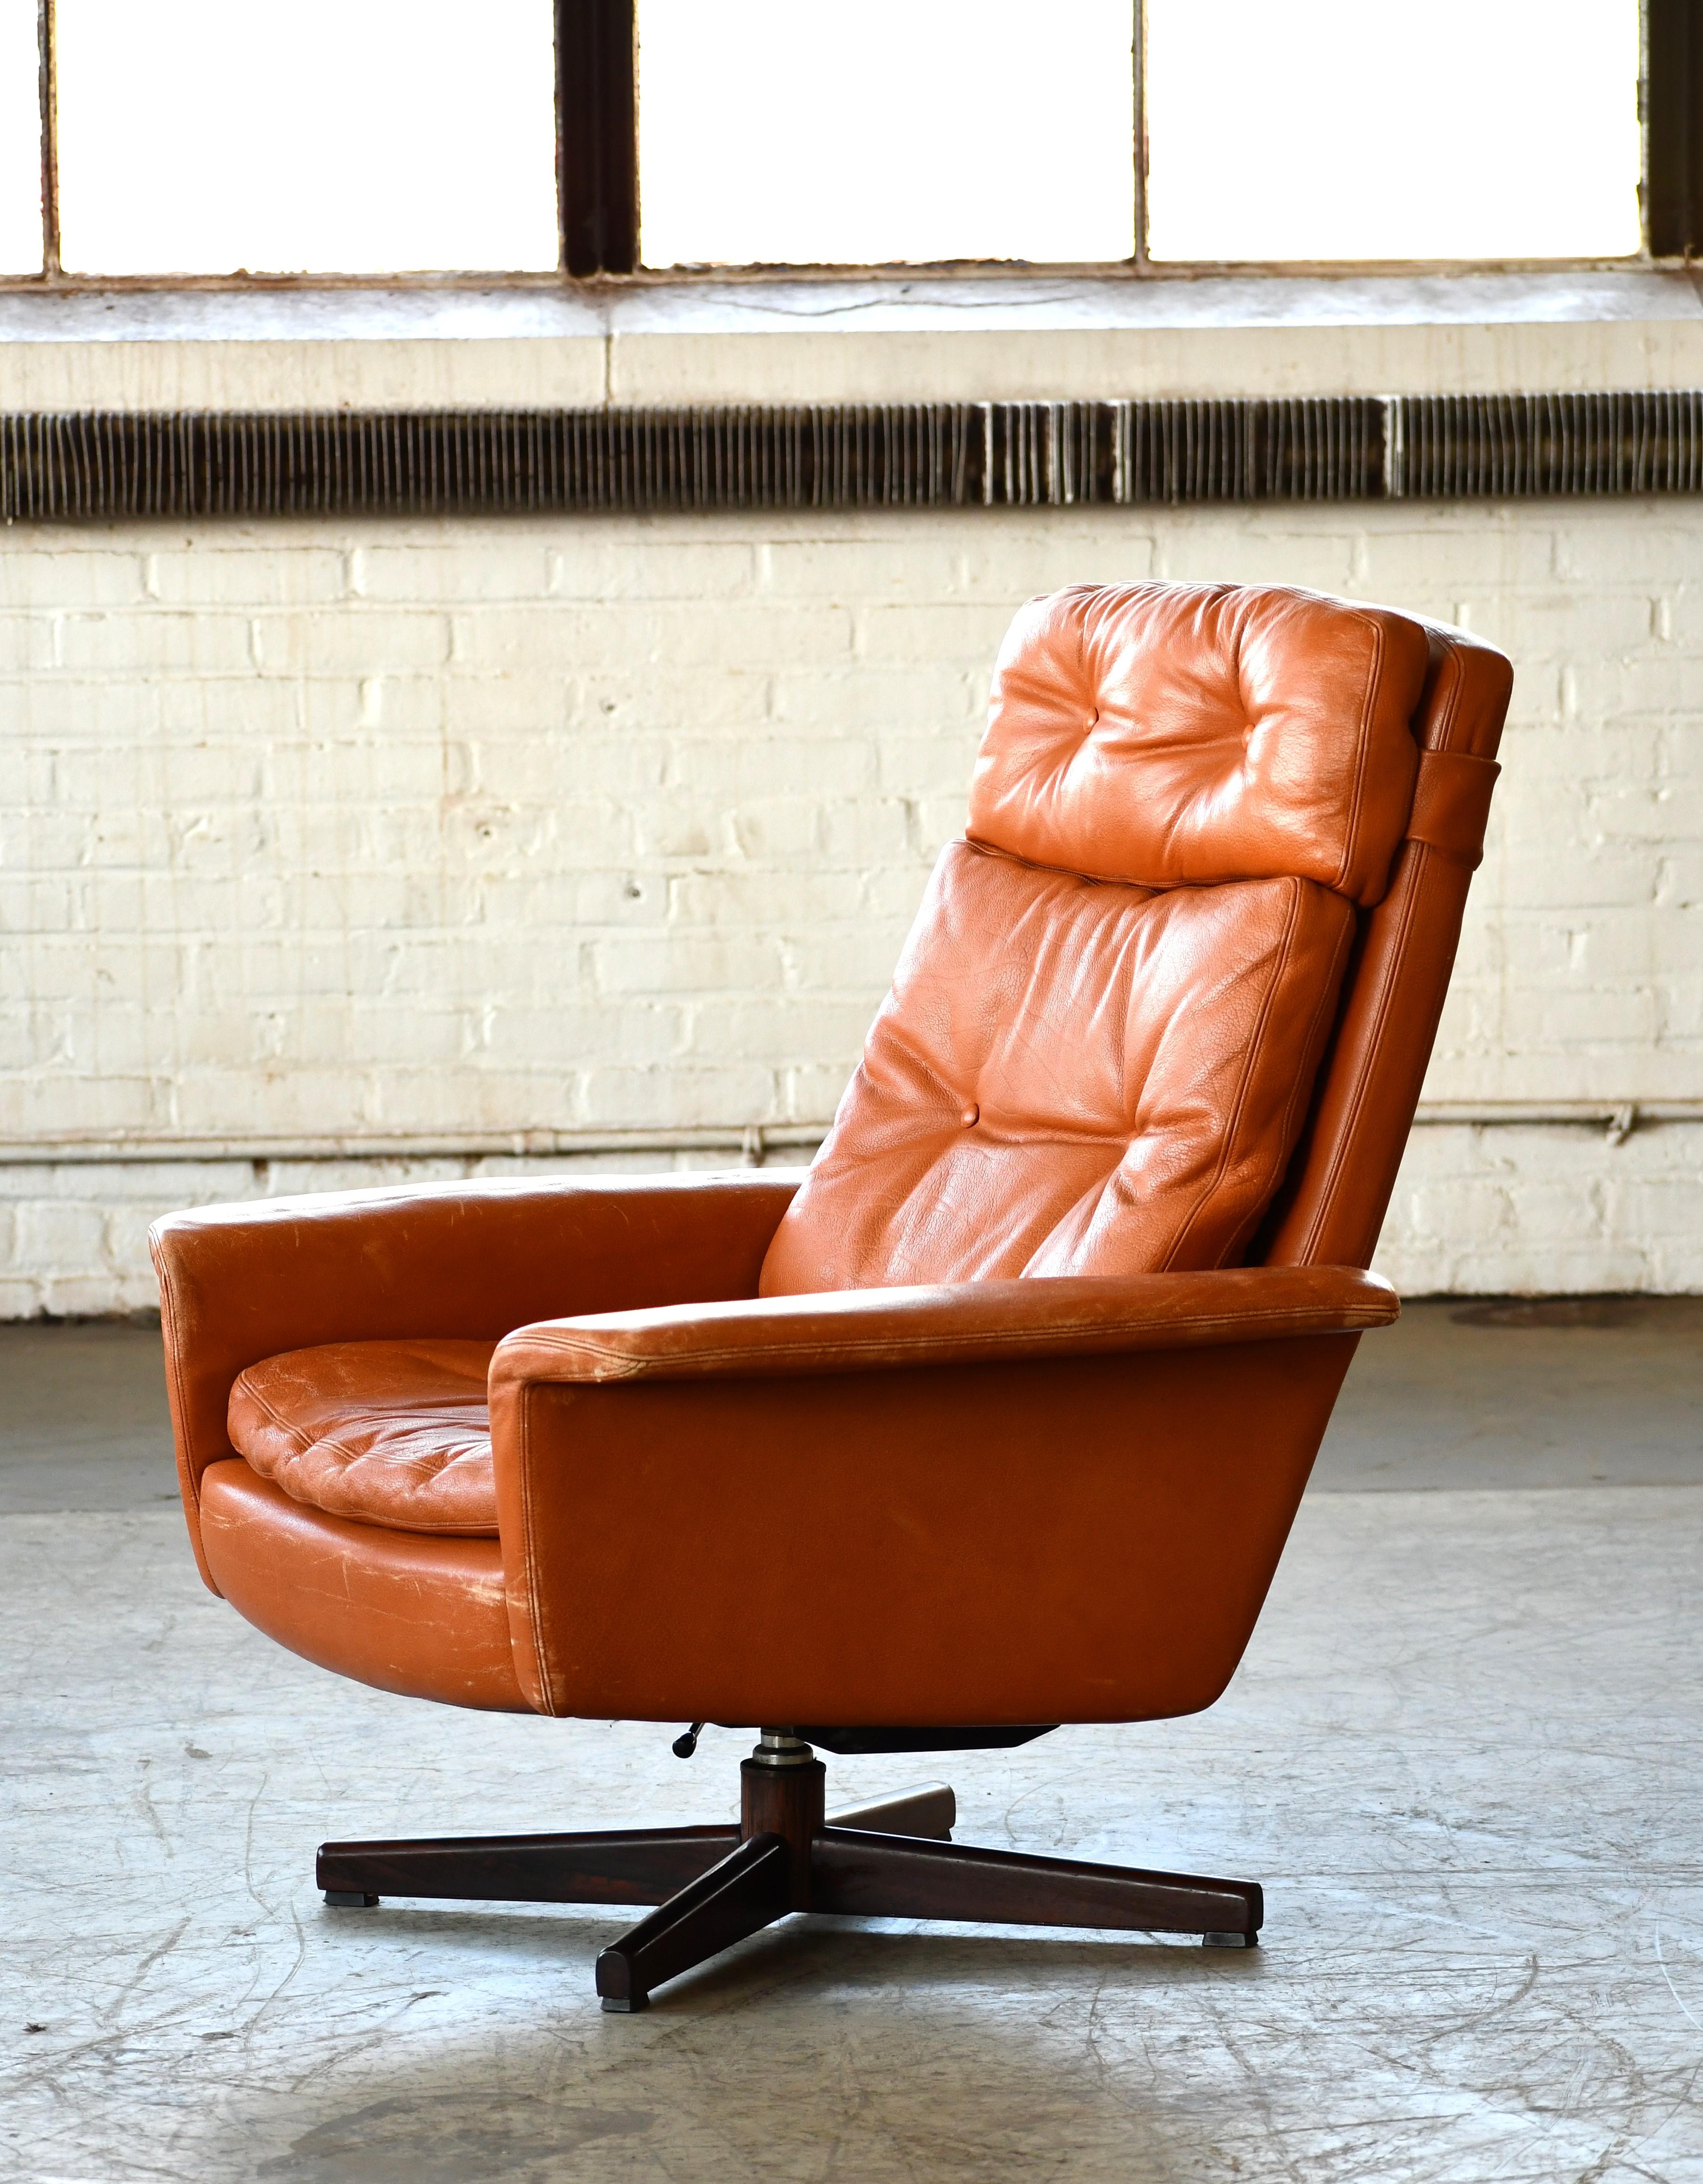 Danish High Back Swivel Lounge Chair with Ottoman in Cognac Leather, 1970's For Sale 1